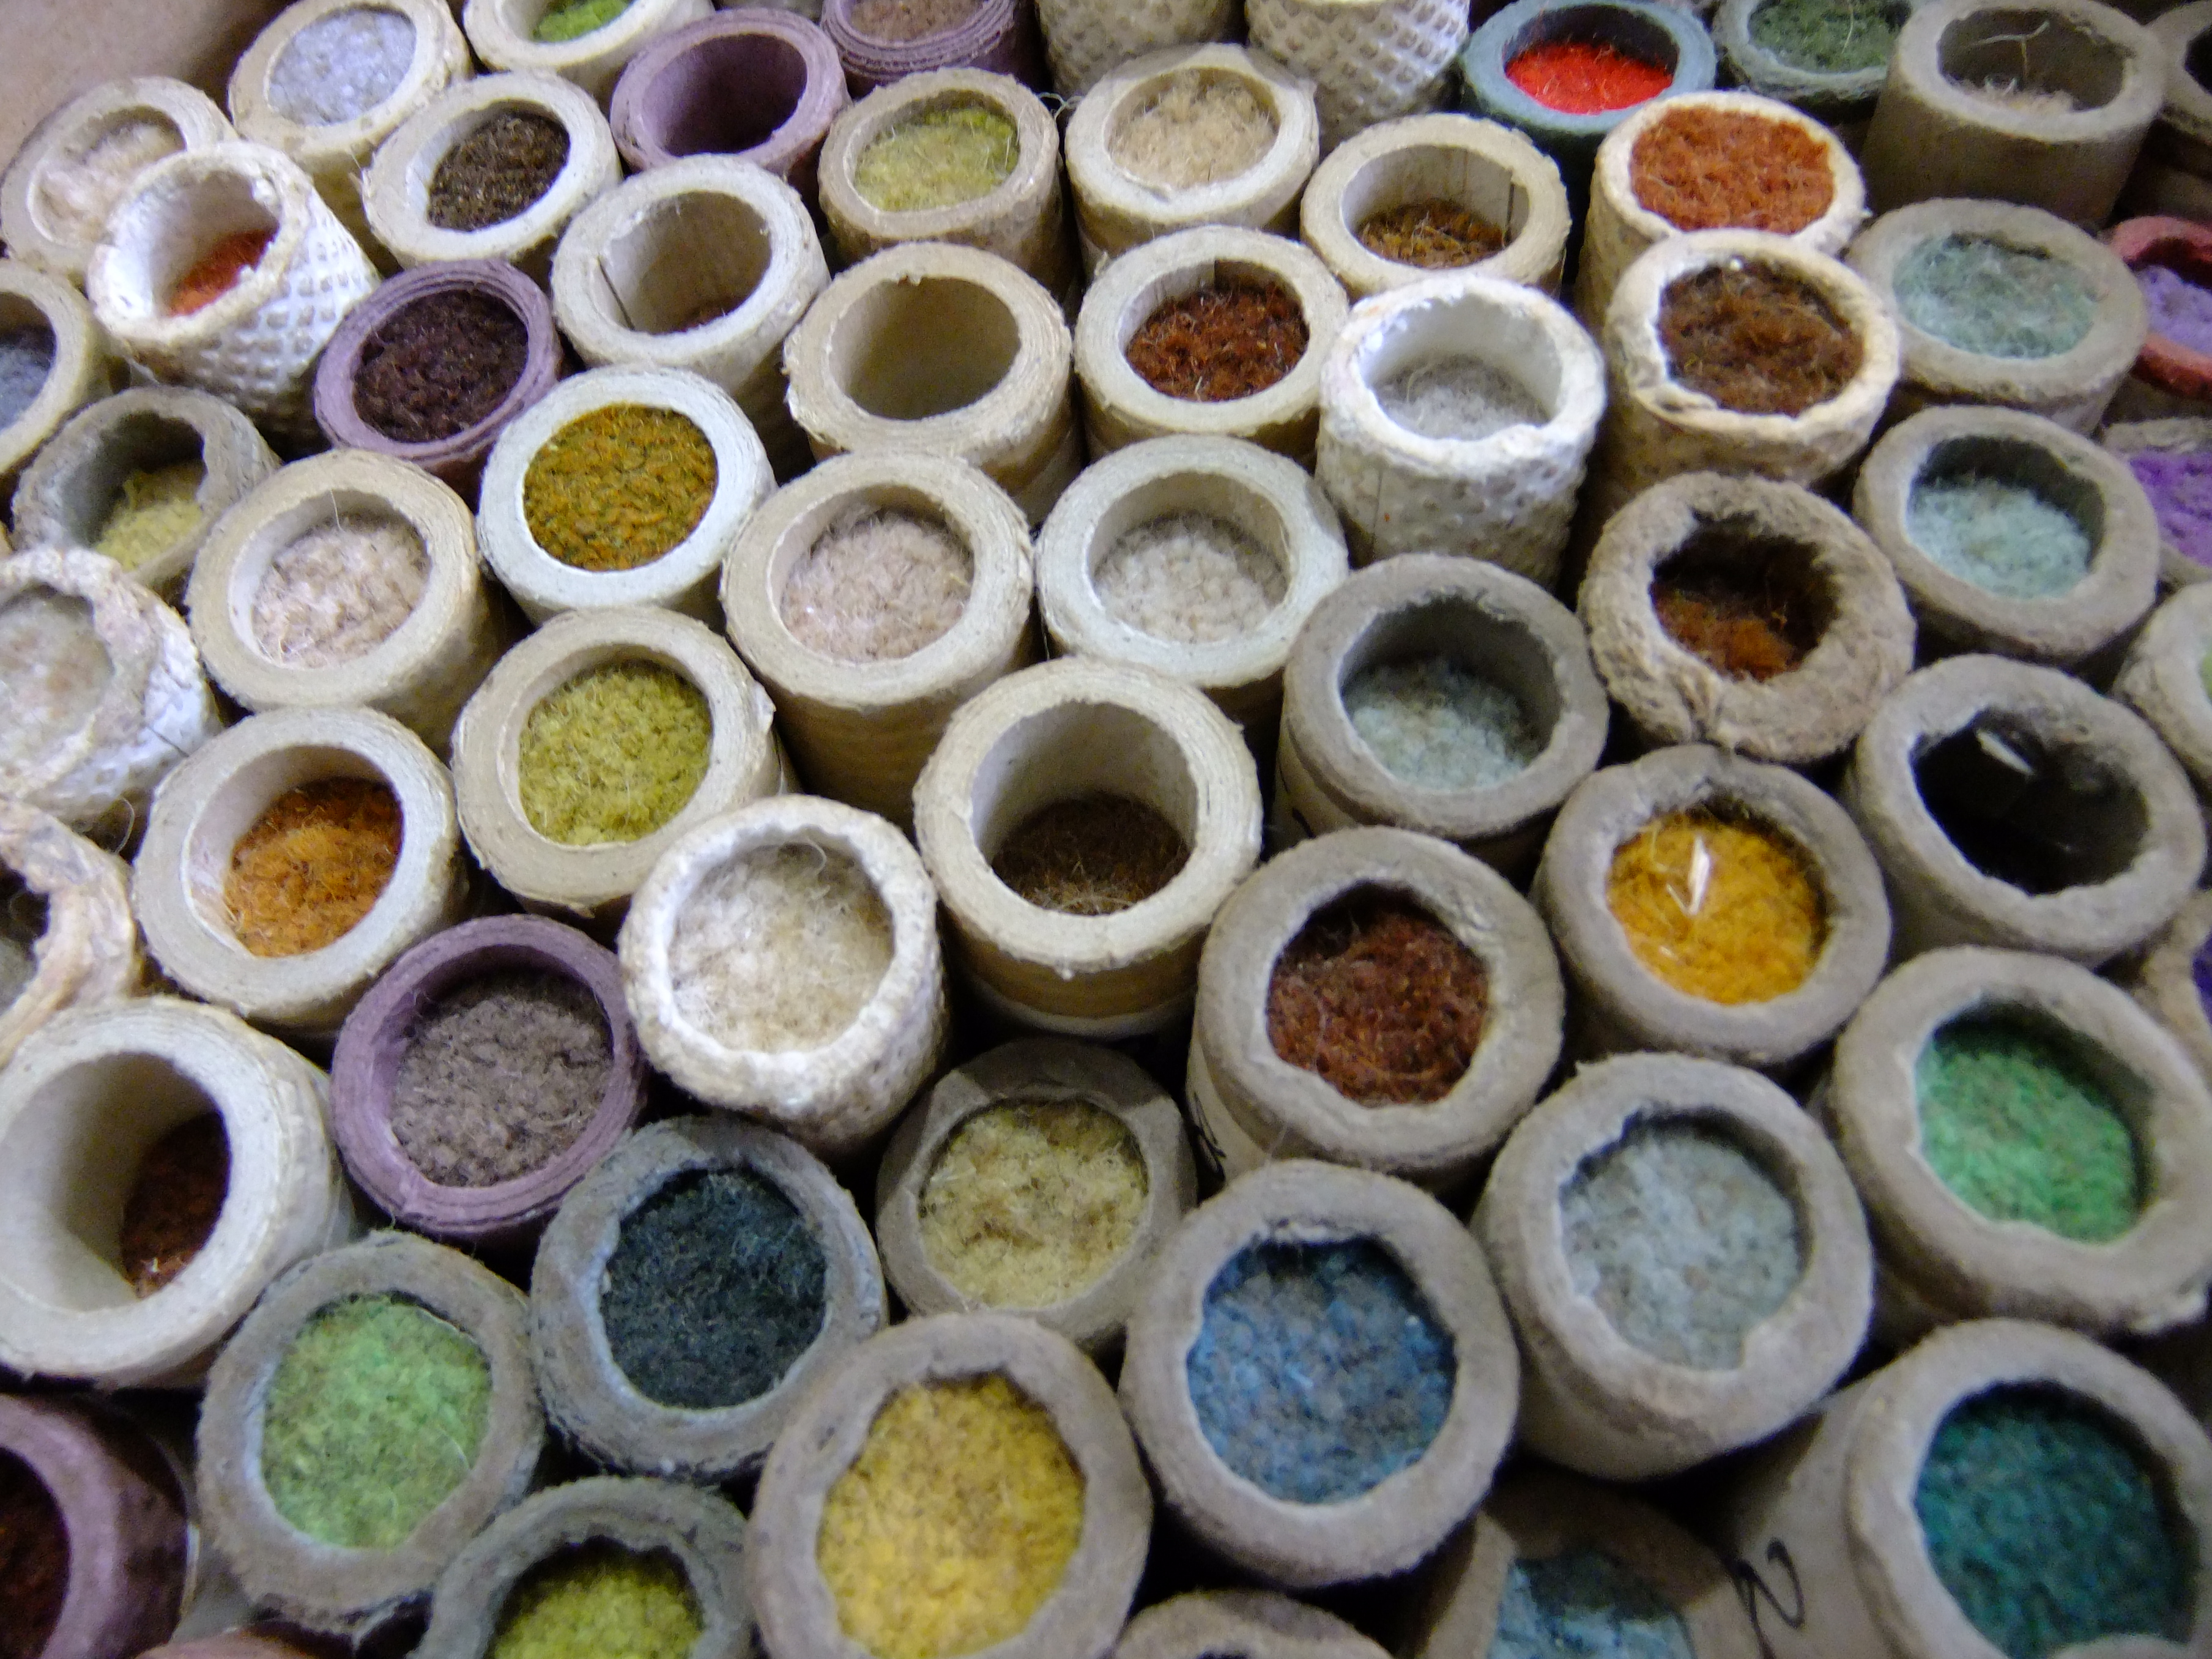 historical dye research - tubes of dyed wool samples for carpets